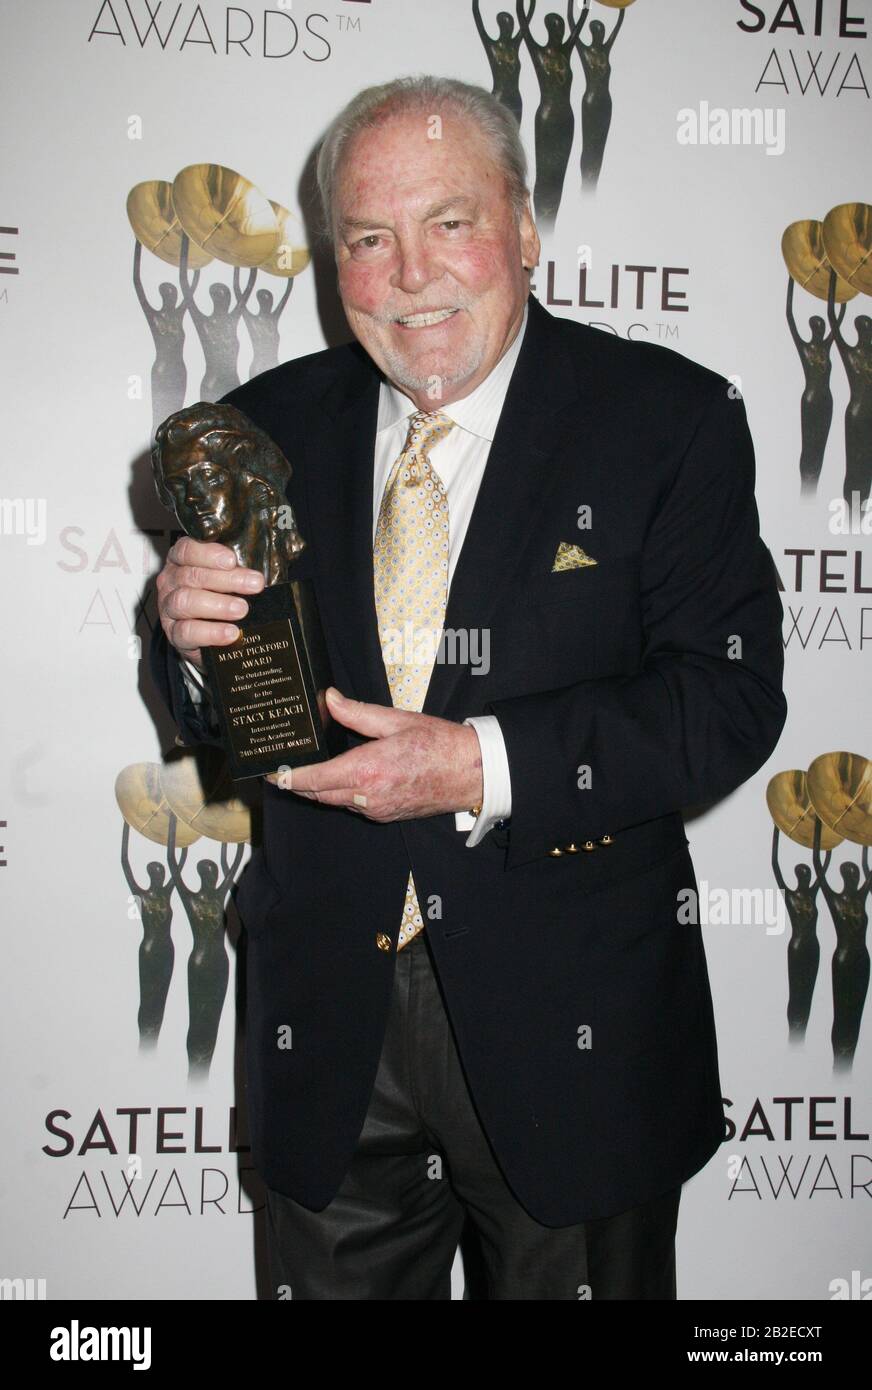 Stacy Keach  03/01/2020 The 24th Annual Satellite Awards - Press Room at the Viceroy L'Ermitage Beverly Hills in Beverly Hills,CA. Photo by I. Hasegawa / HNW / PictureLux Stock Photo